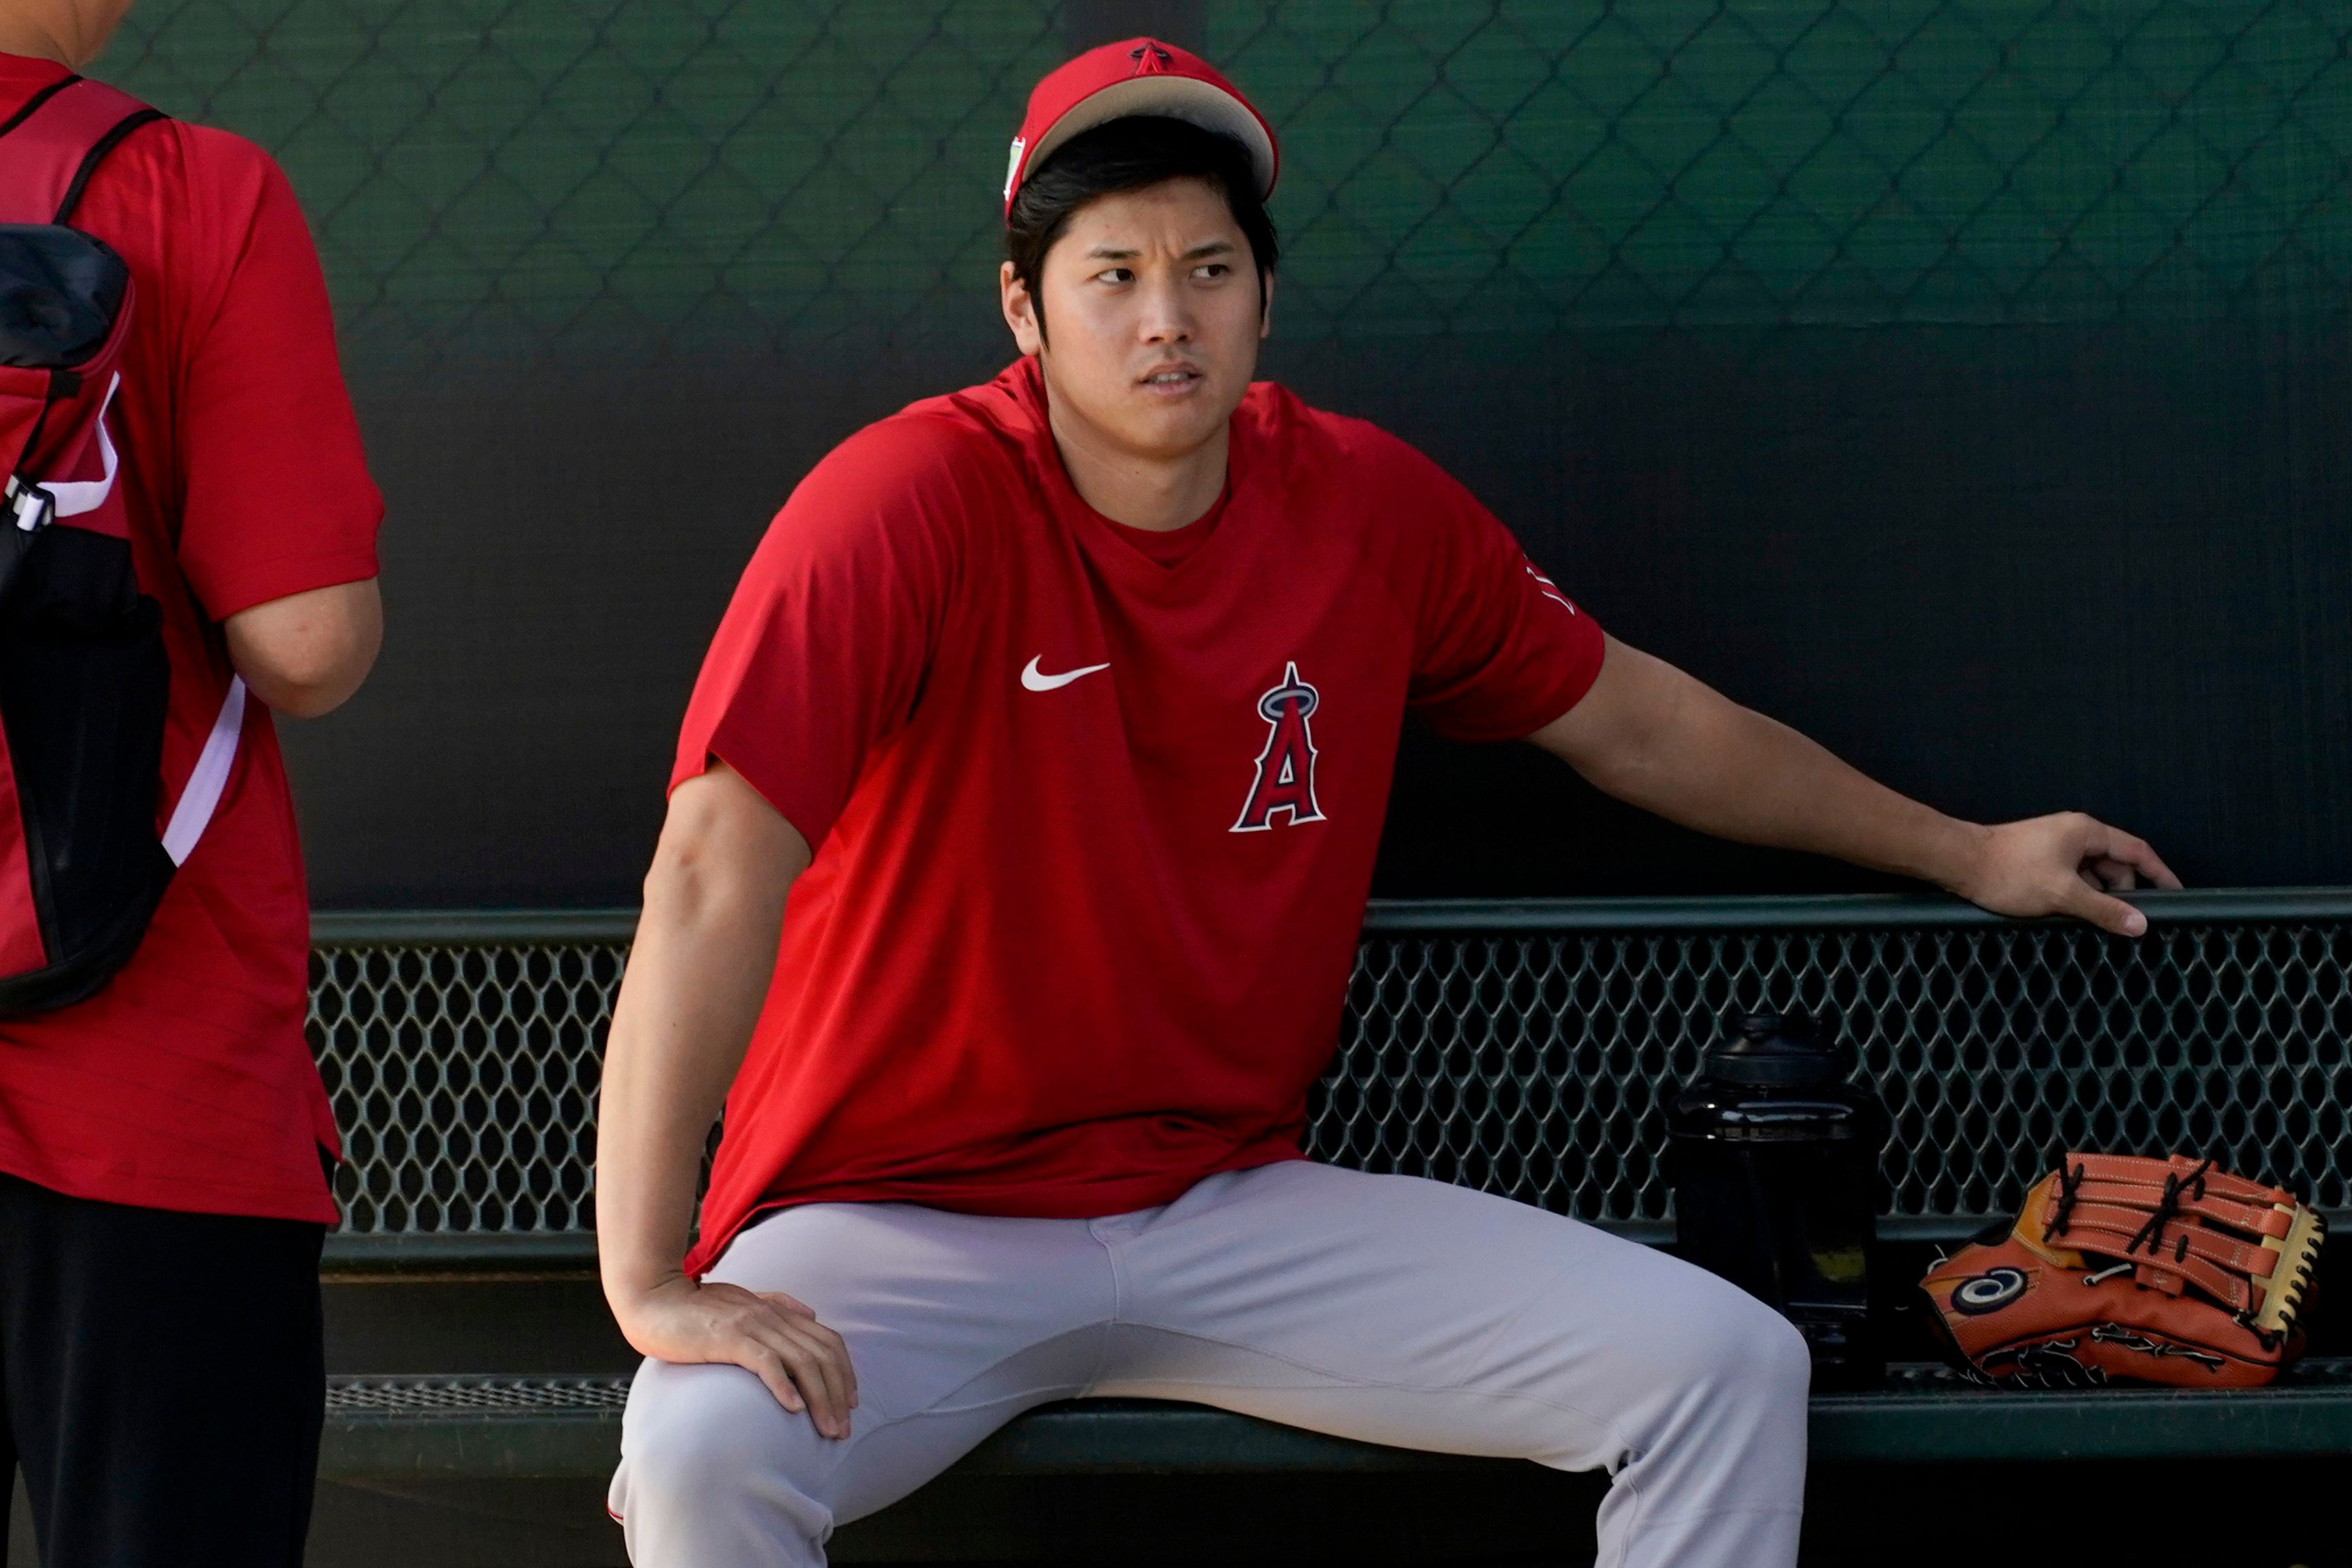 Ohtani aims for improvement even after MVP season for Angels